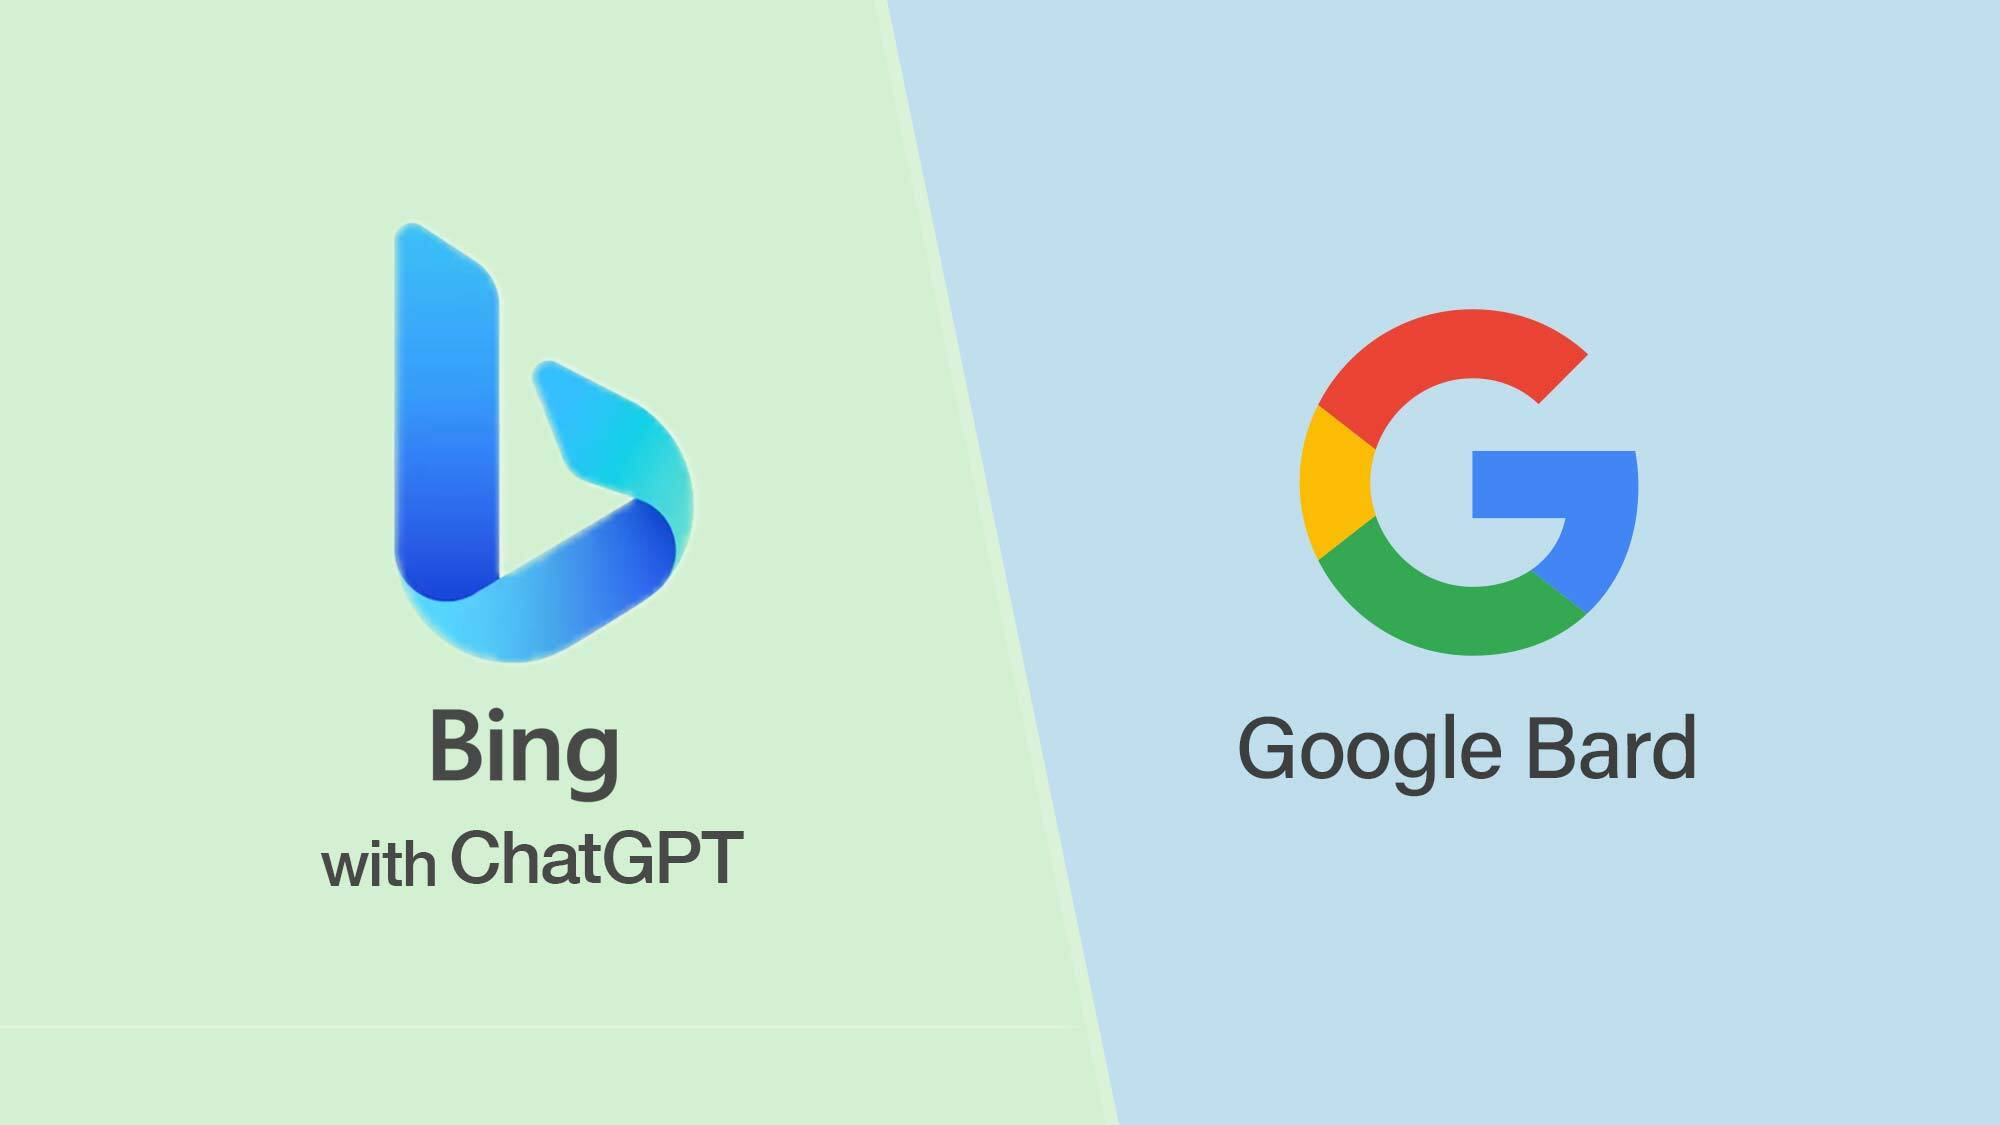 Bing with ChatGPT vs Google Bard: Which AI chatbot wins? | Tom's Guide